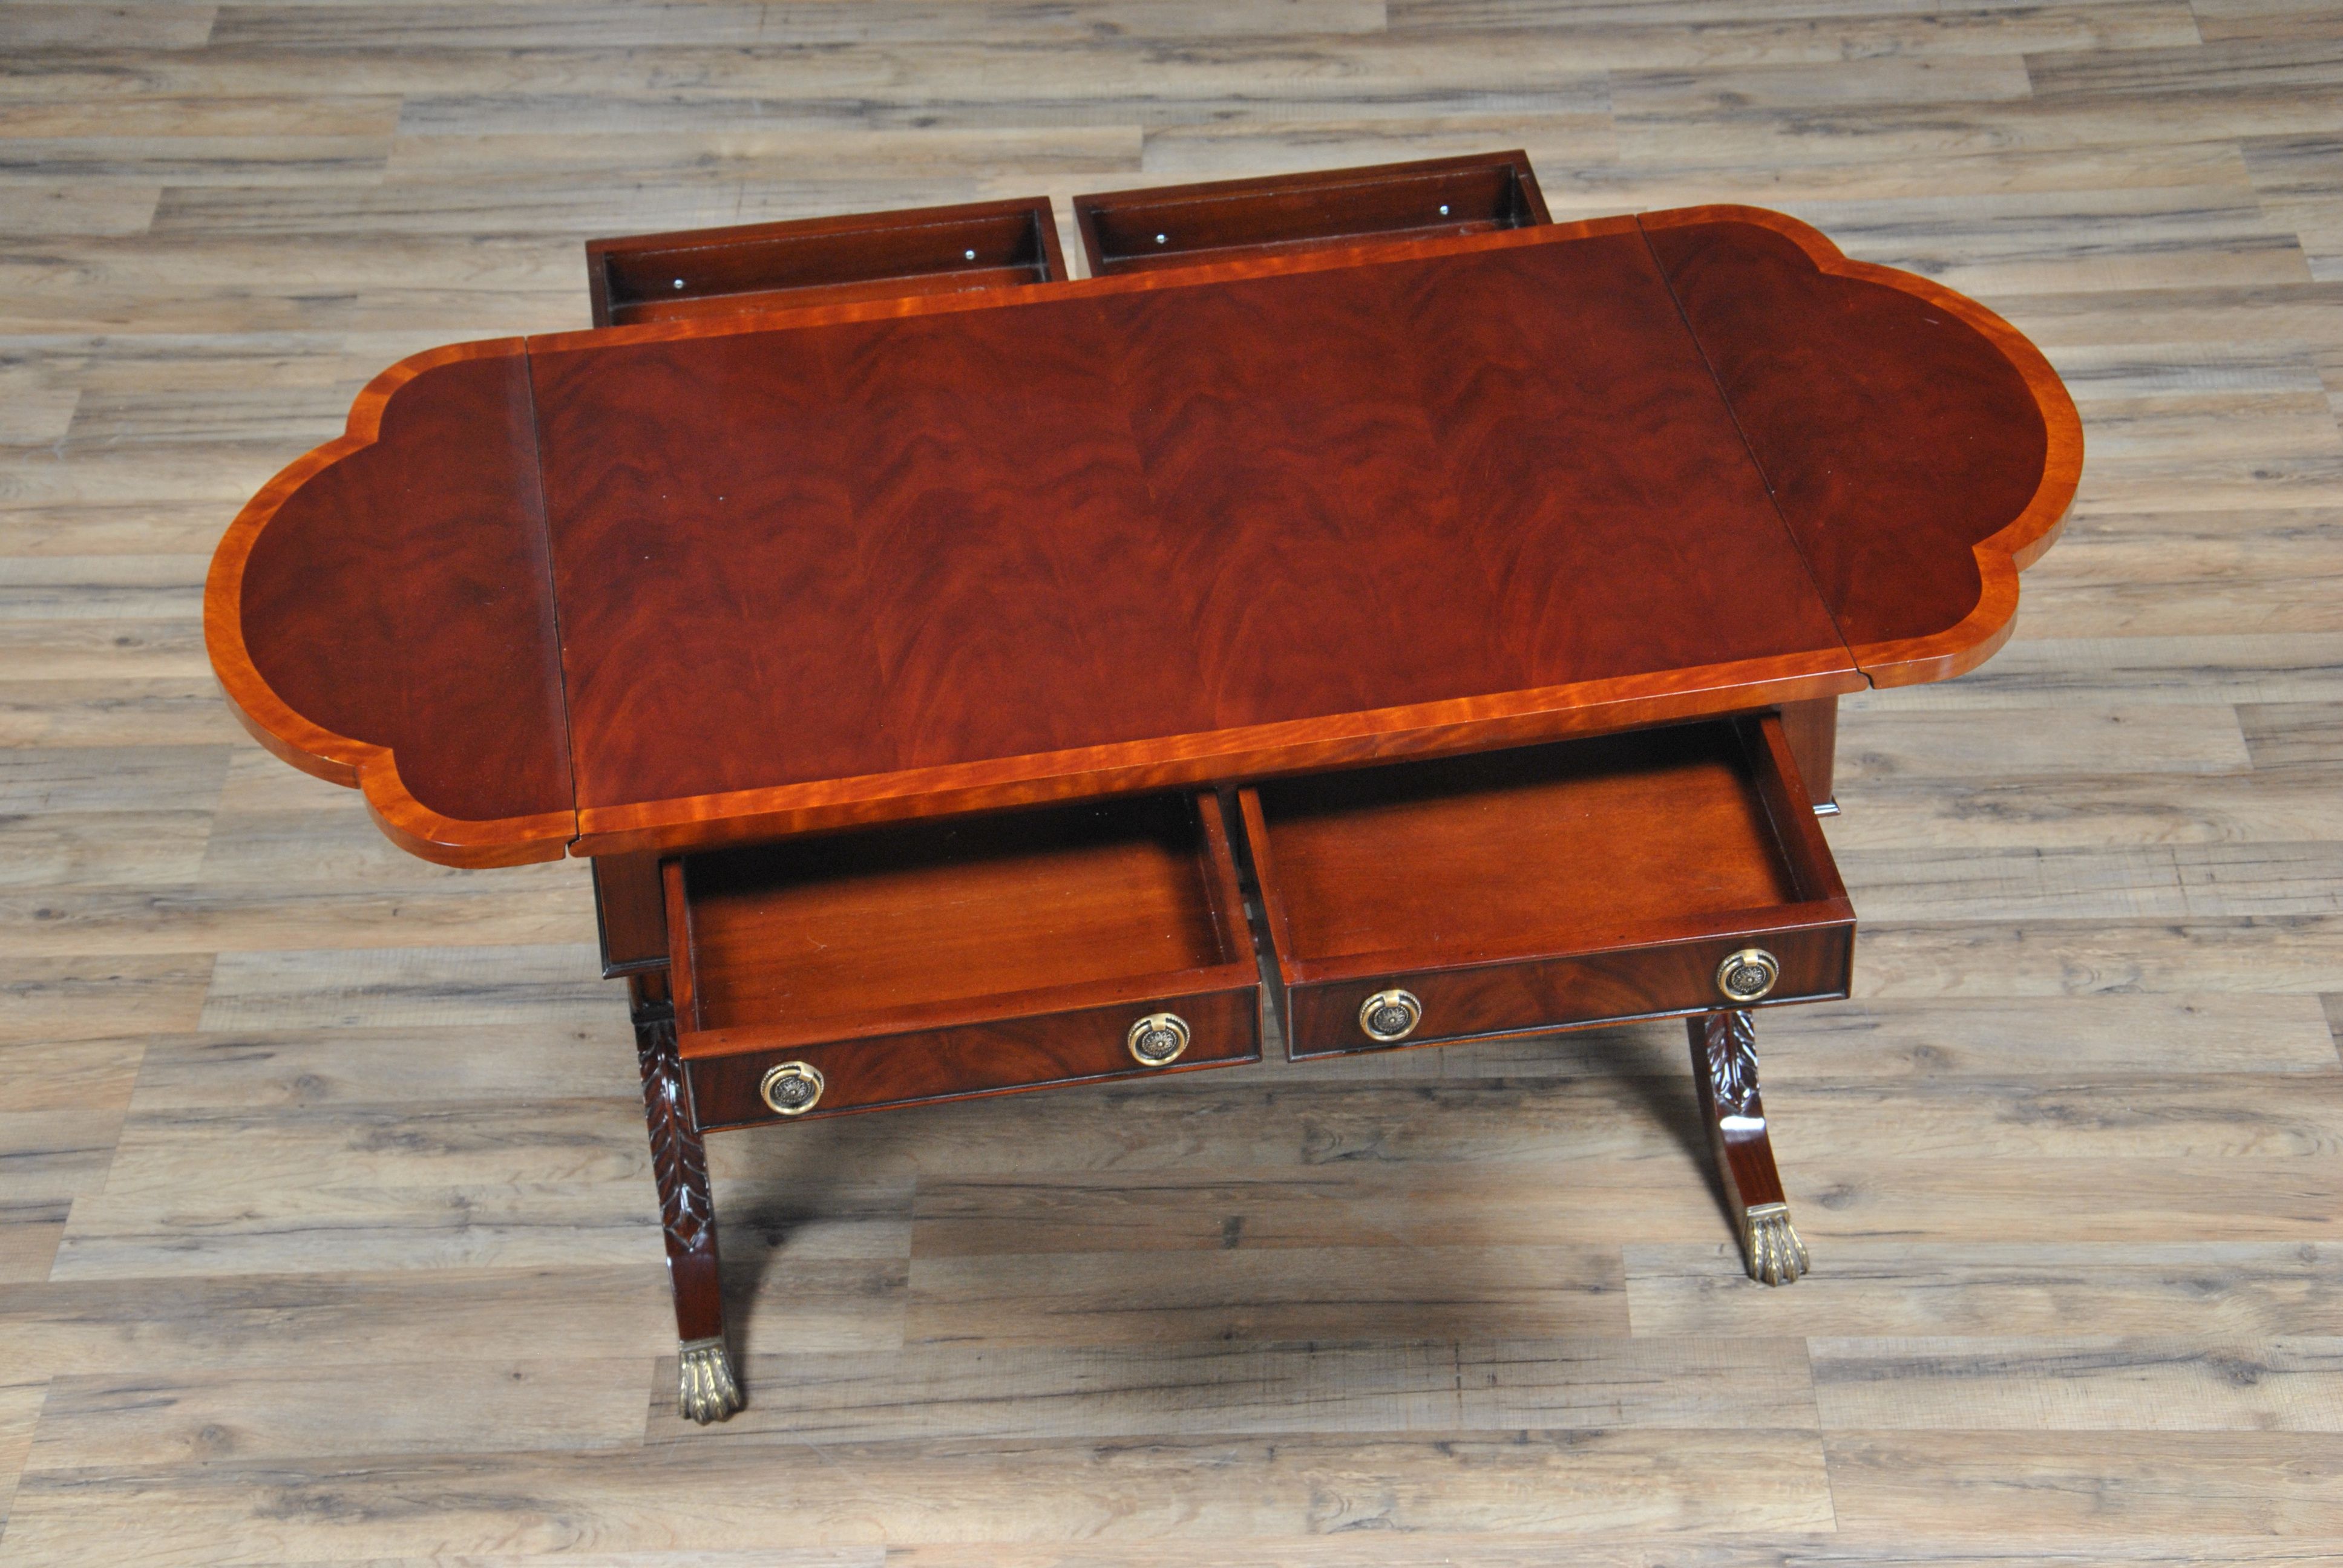 Lyre Coffee Tables With Most Recent Dropside Coffee Table,lyre Or Harp Coffee Table, Niagara Furniture, (View 8 of 20)